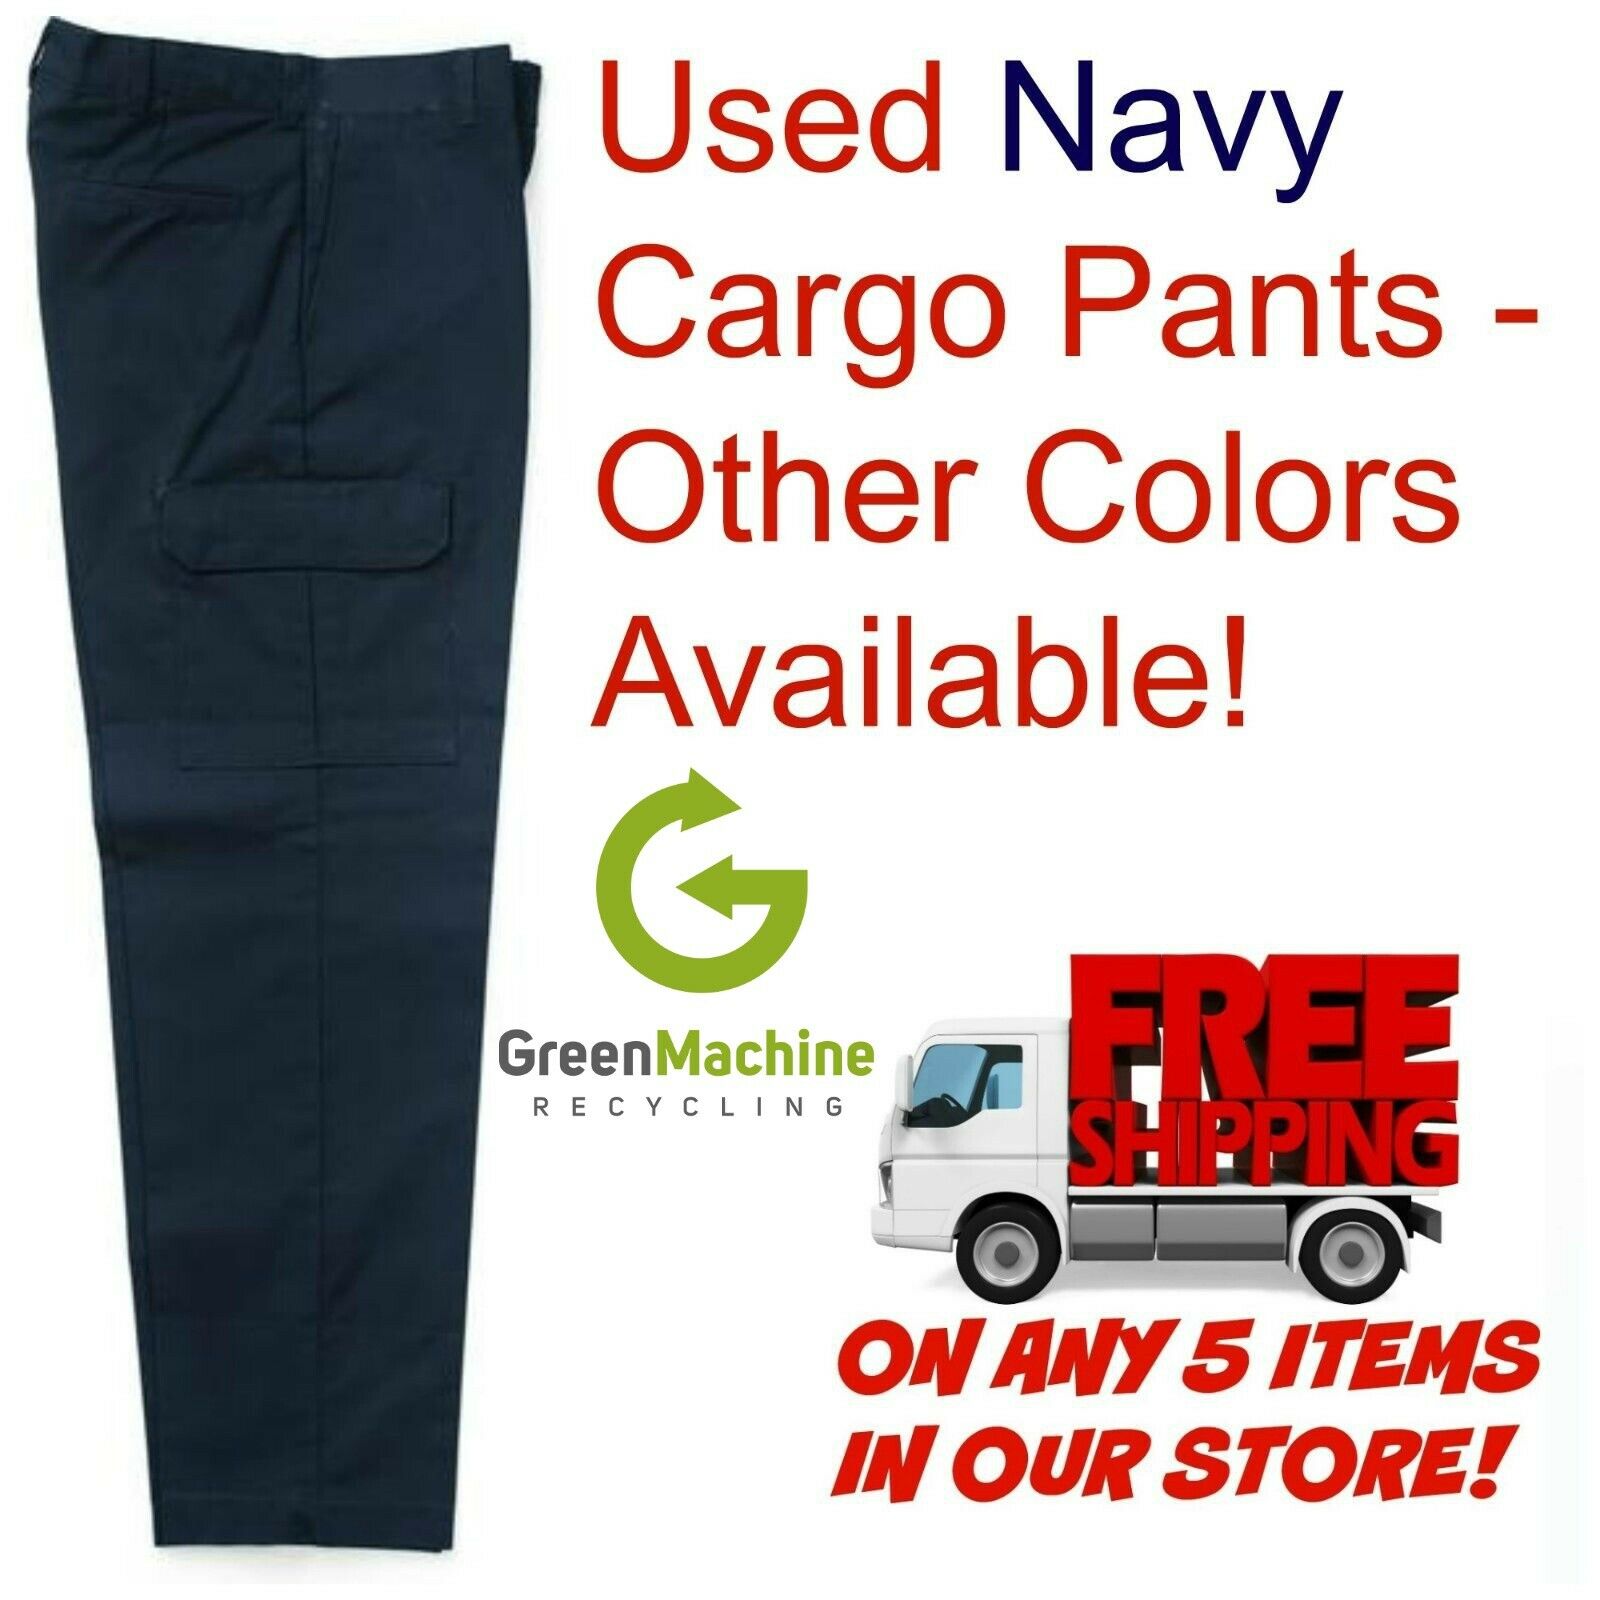 Used Uniform Work Pants Cargo Cintas Redkap Unifirst G&k Dickies And Others